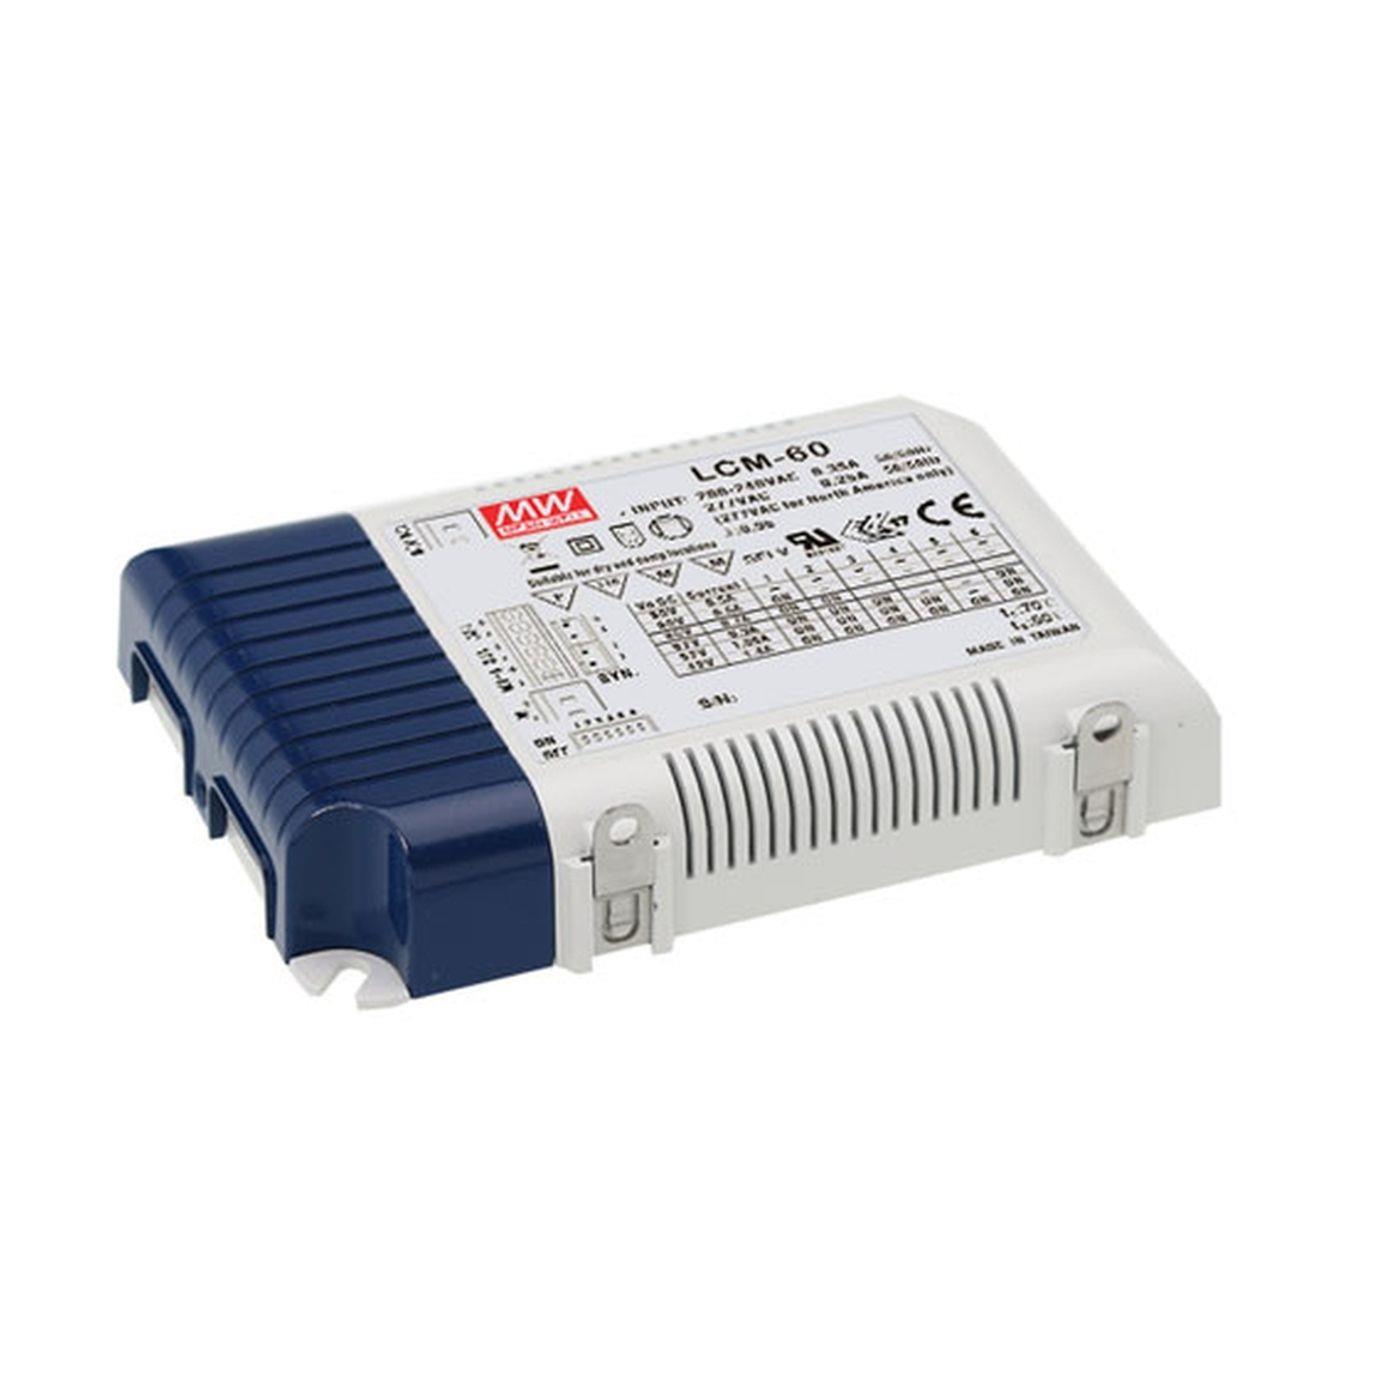 LCM-60 60W 0-10V Dimmable Constant current LED power supply Driver Transformer 500 600 700 900 1050 1400mA